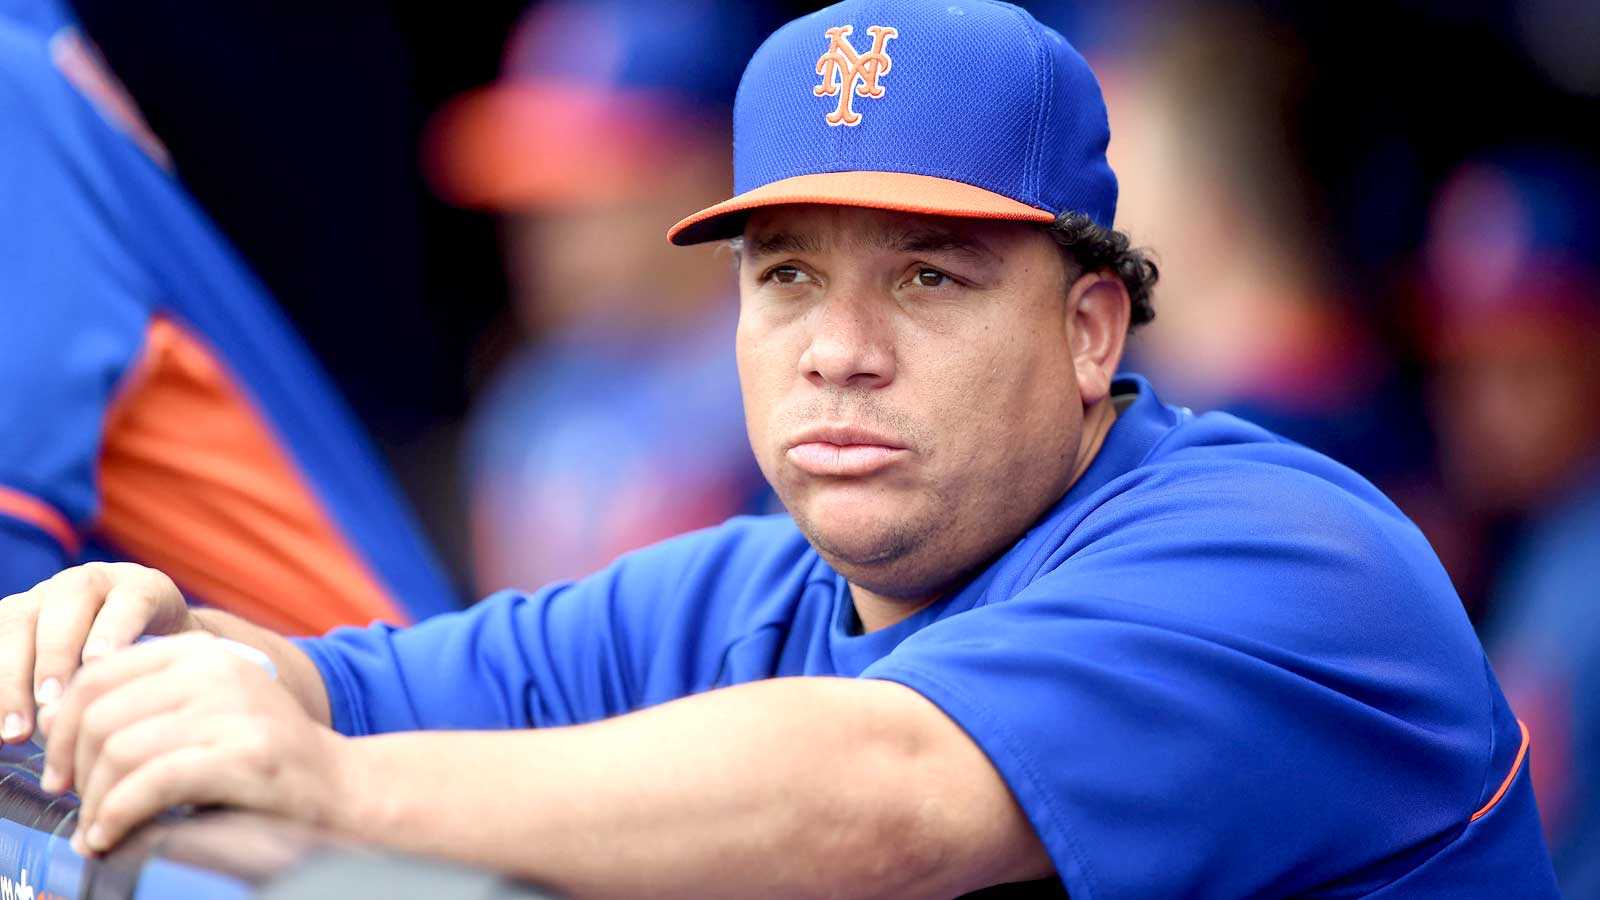 New York Post: Bartolo Colon Had Two Children with Another Woman